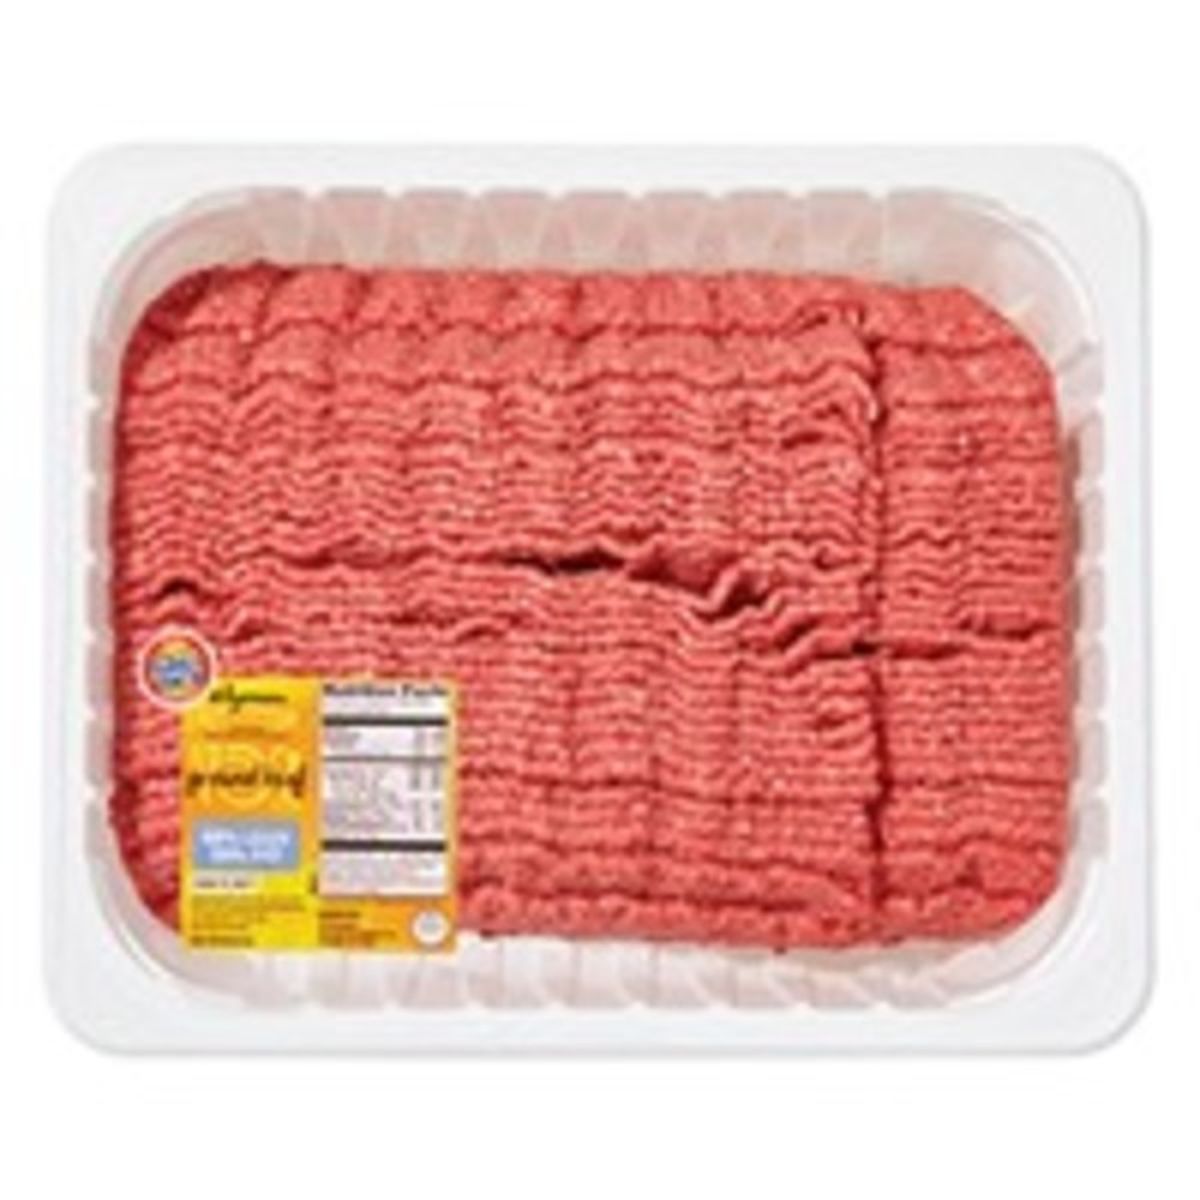 Calories in Wegmans Ground Beef 80/20 FAMILY PACK